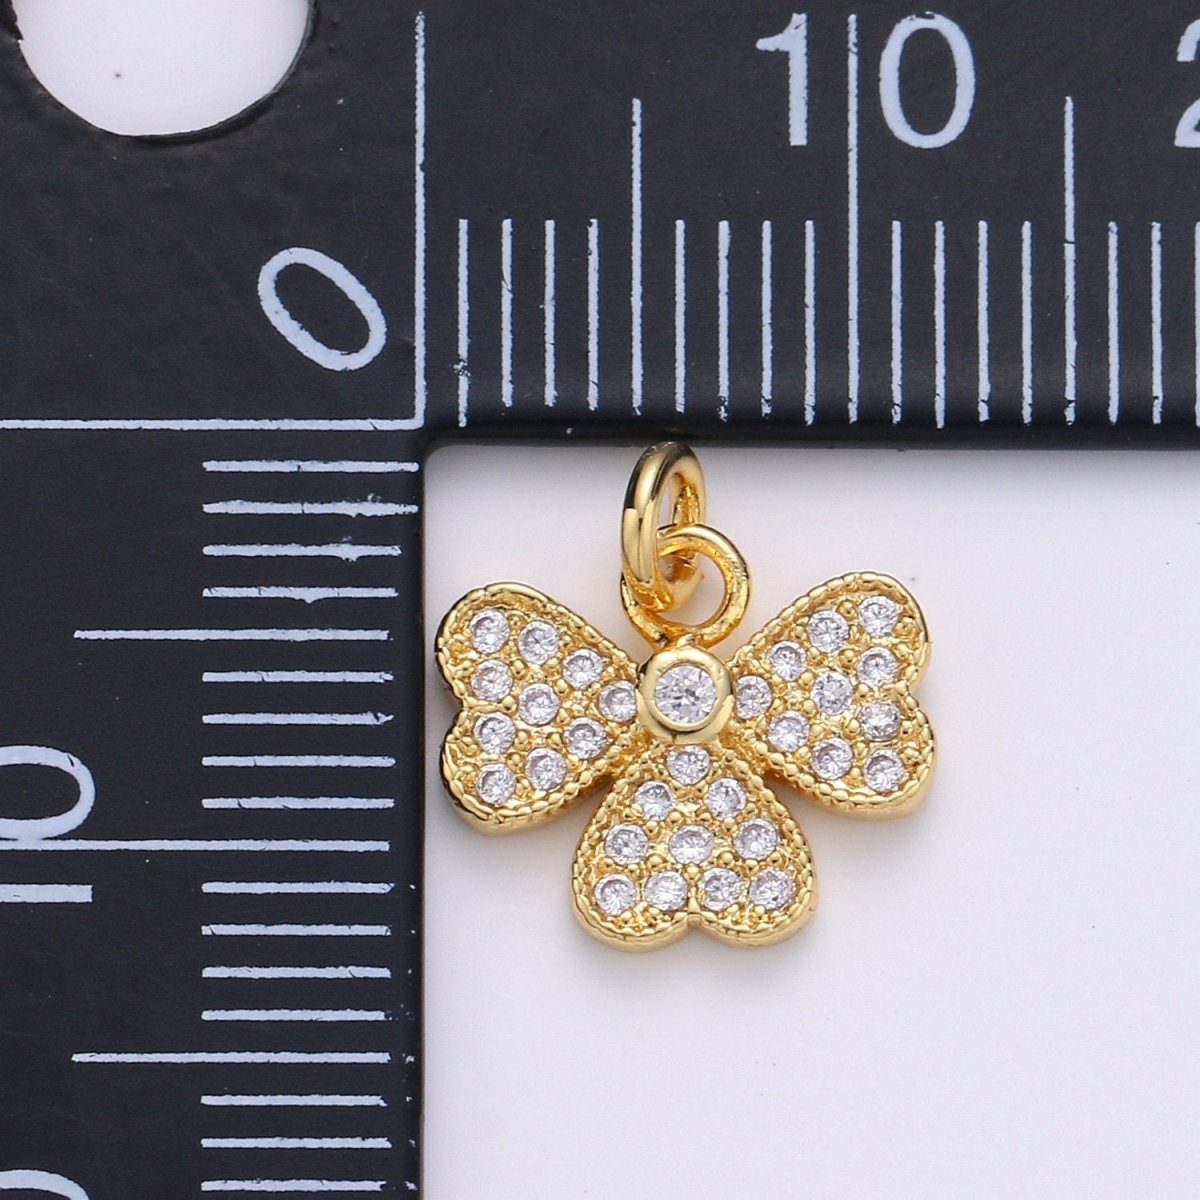 14k Gold Filled Bow Charm Micro Pave Ribbon Charm, Clear Cubic Charms, CZ Gold Mini Charm, Dainty Minimalist Jewelry Supply D-710 - DLUXCA